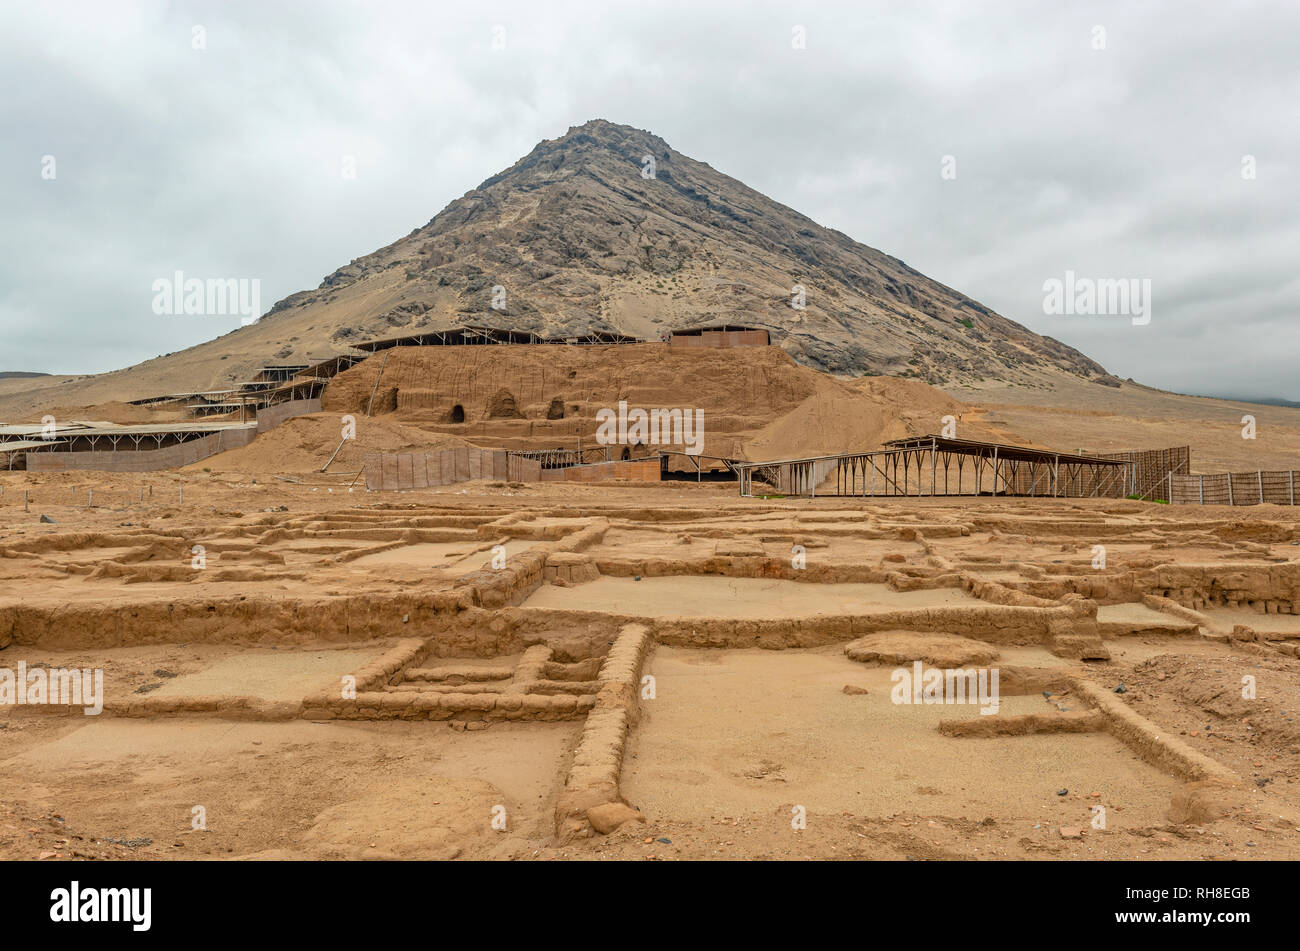 The Moche archaeological site of the Huaca de la Luna or the Moon Pyramid located in the northern desert of Peru near the city of Trujillo. Stock Photo